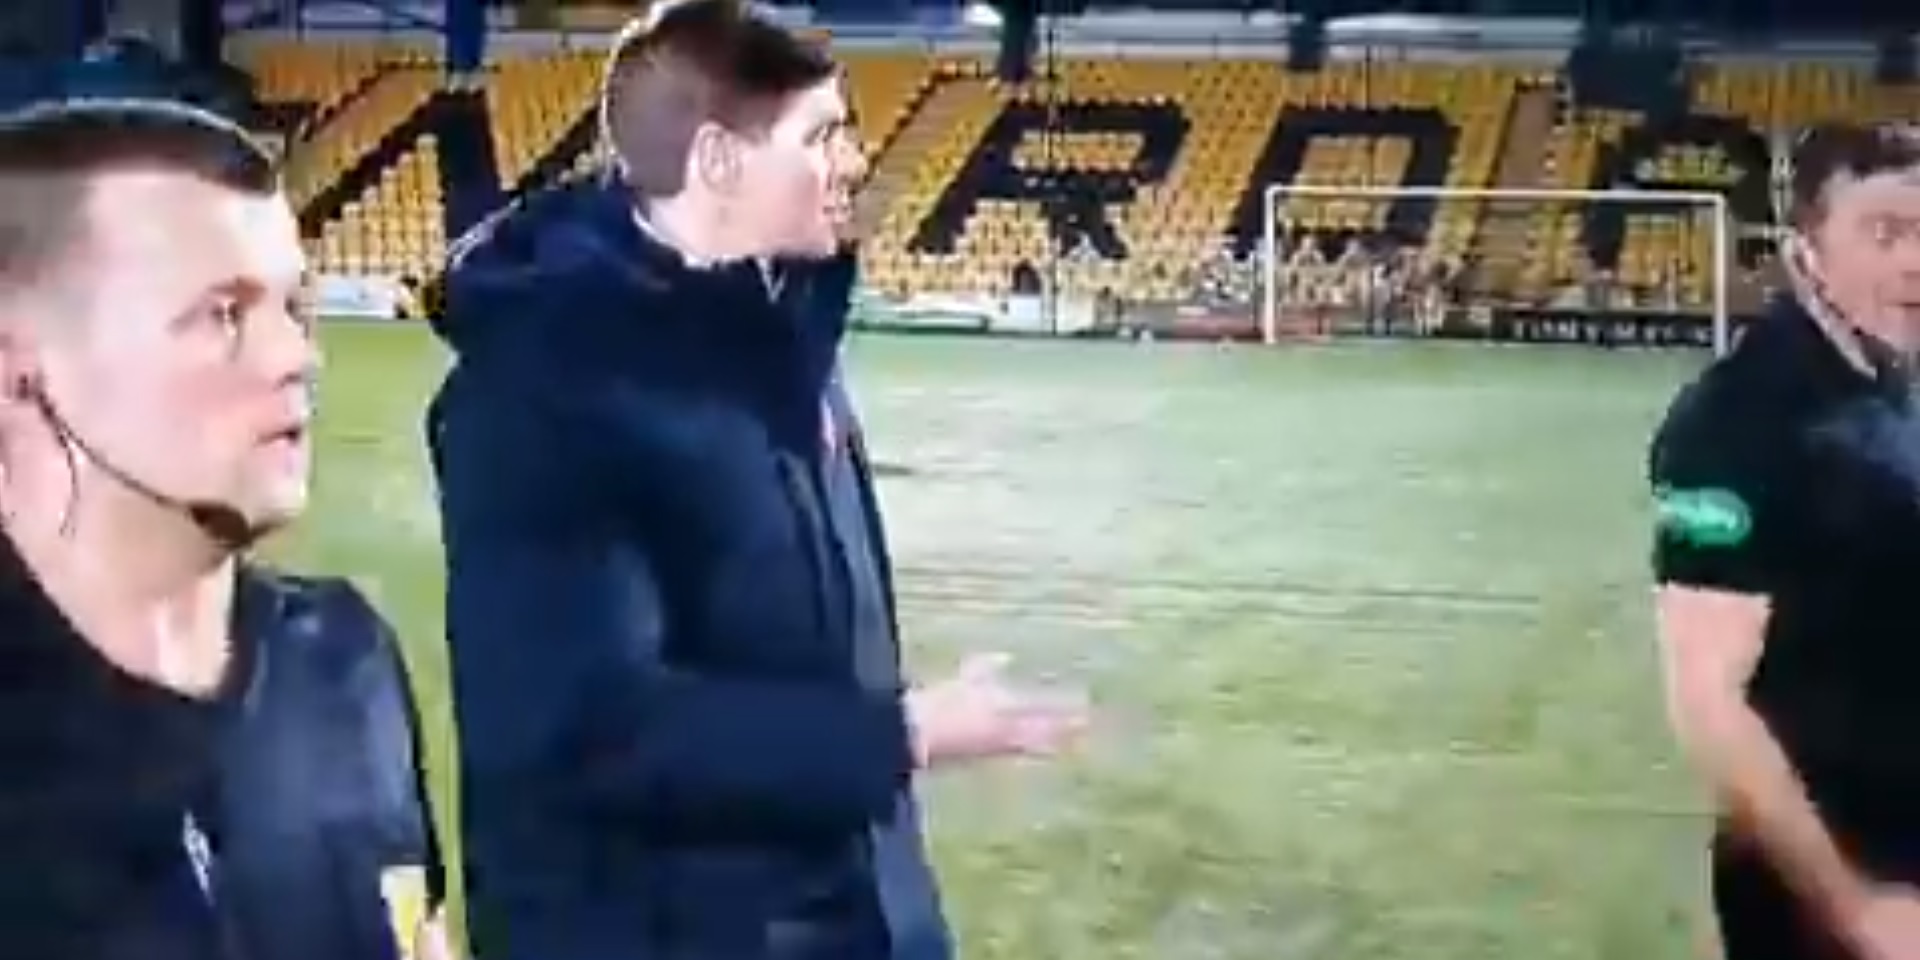 (Video) Steven Gerrard’s explicit confrontation with official; referee flashes card before sending Rangers boss to the stands